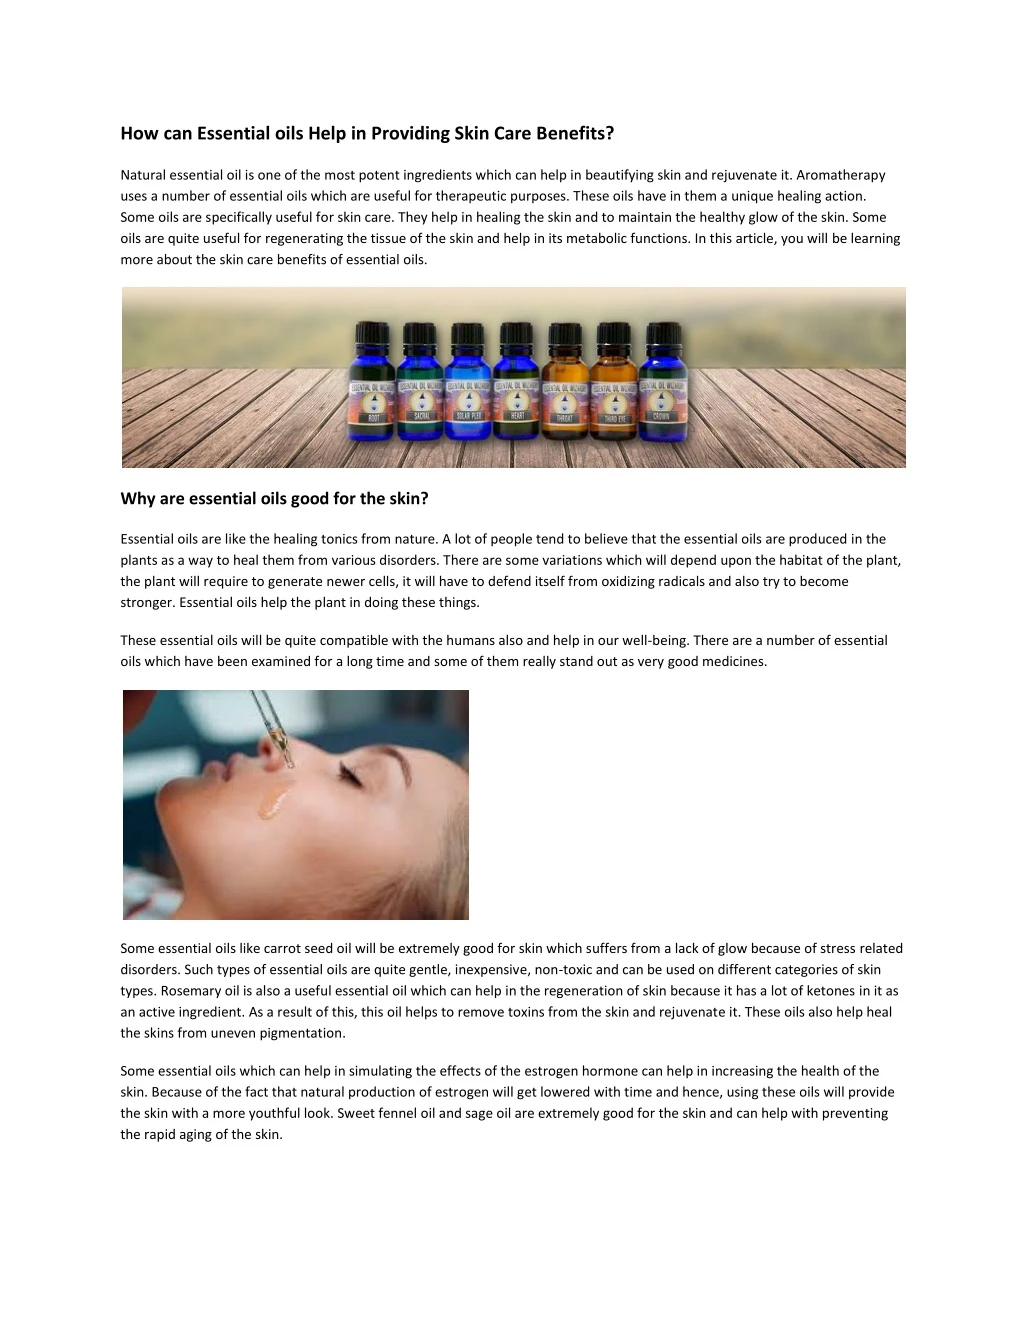 how can essential oils help in providing skin